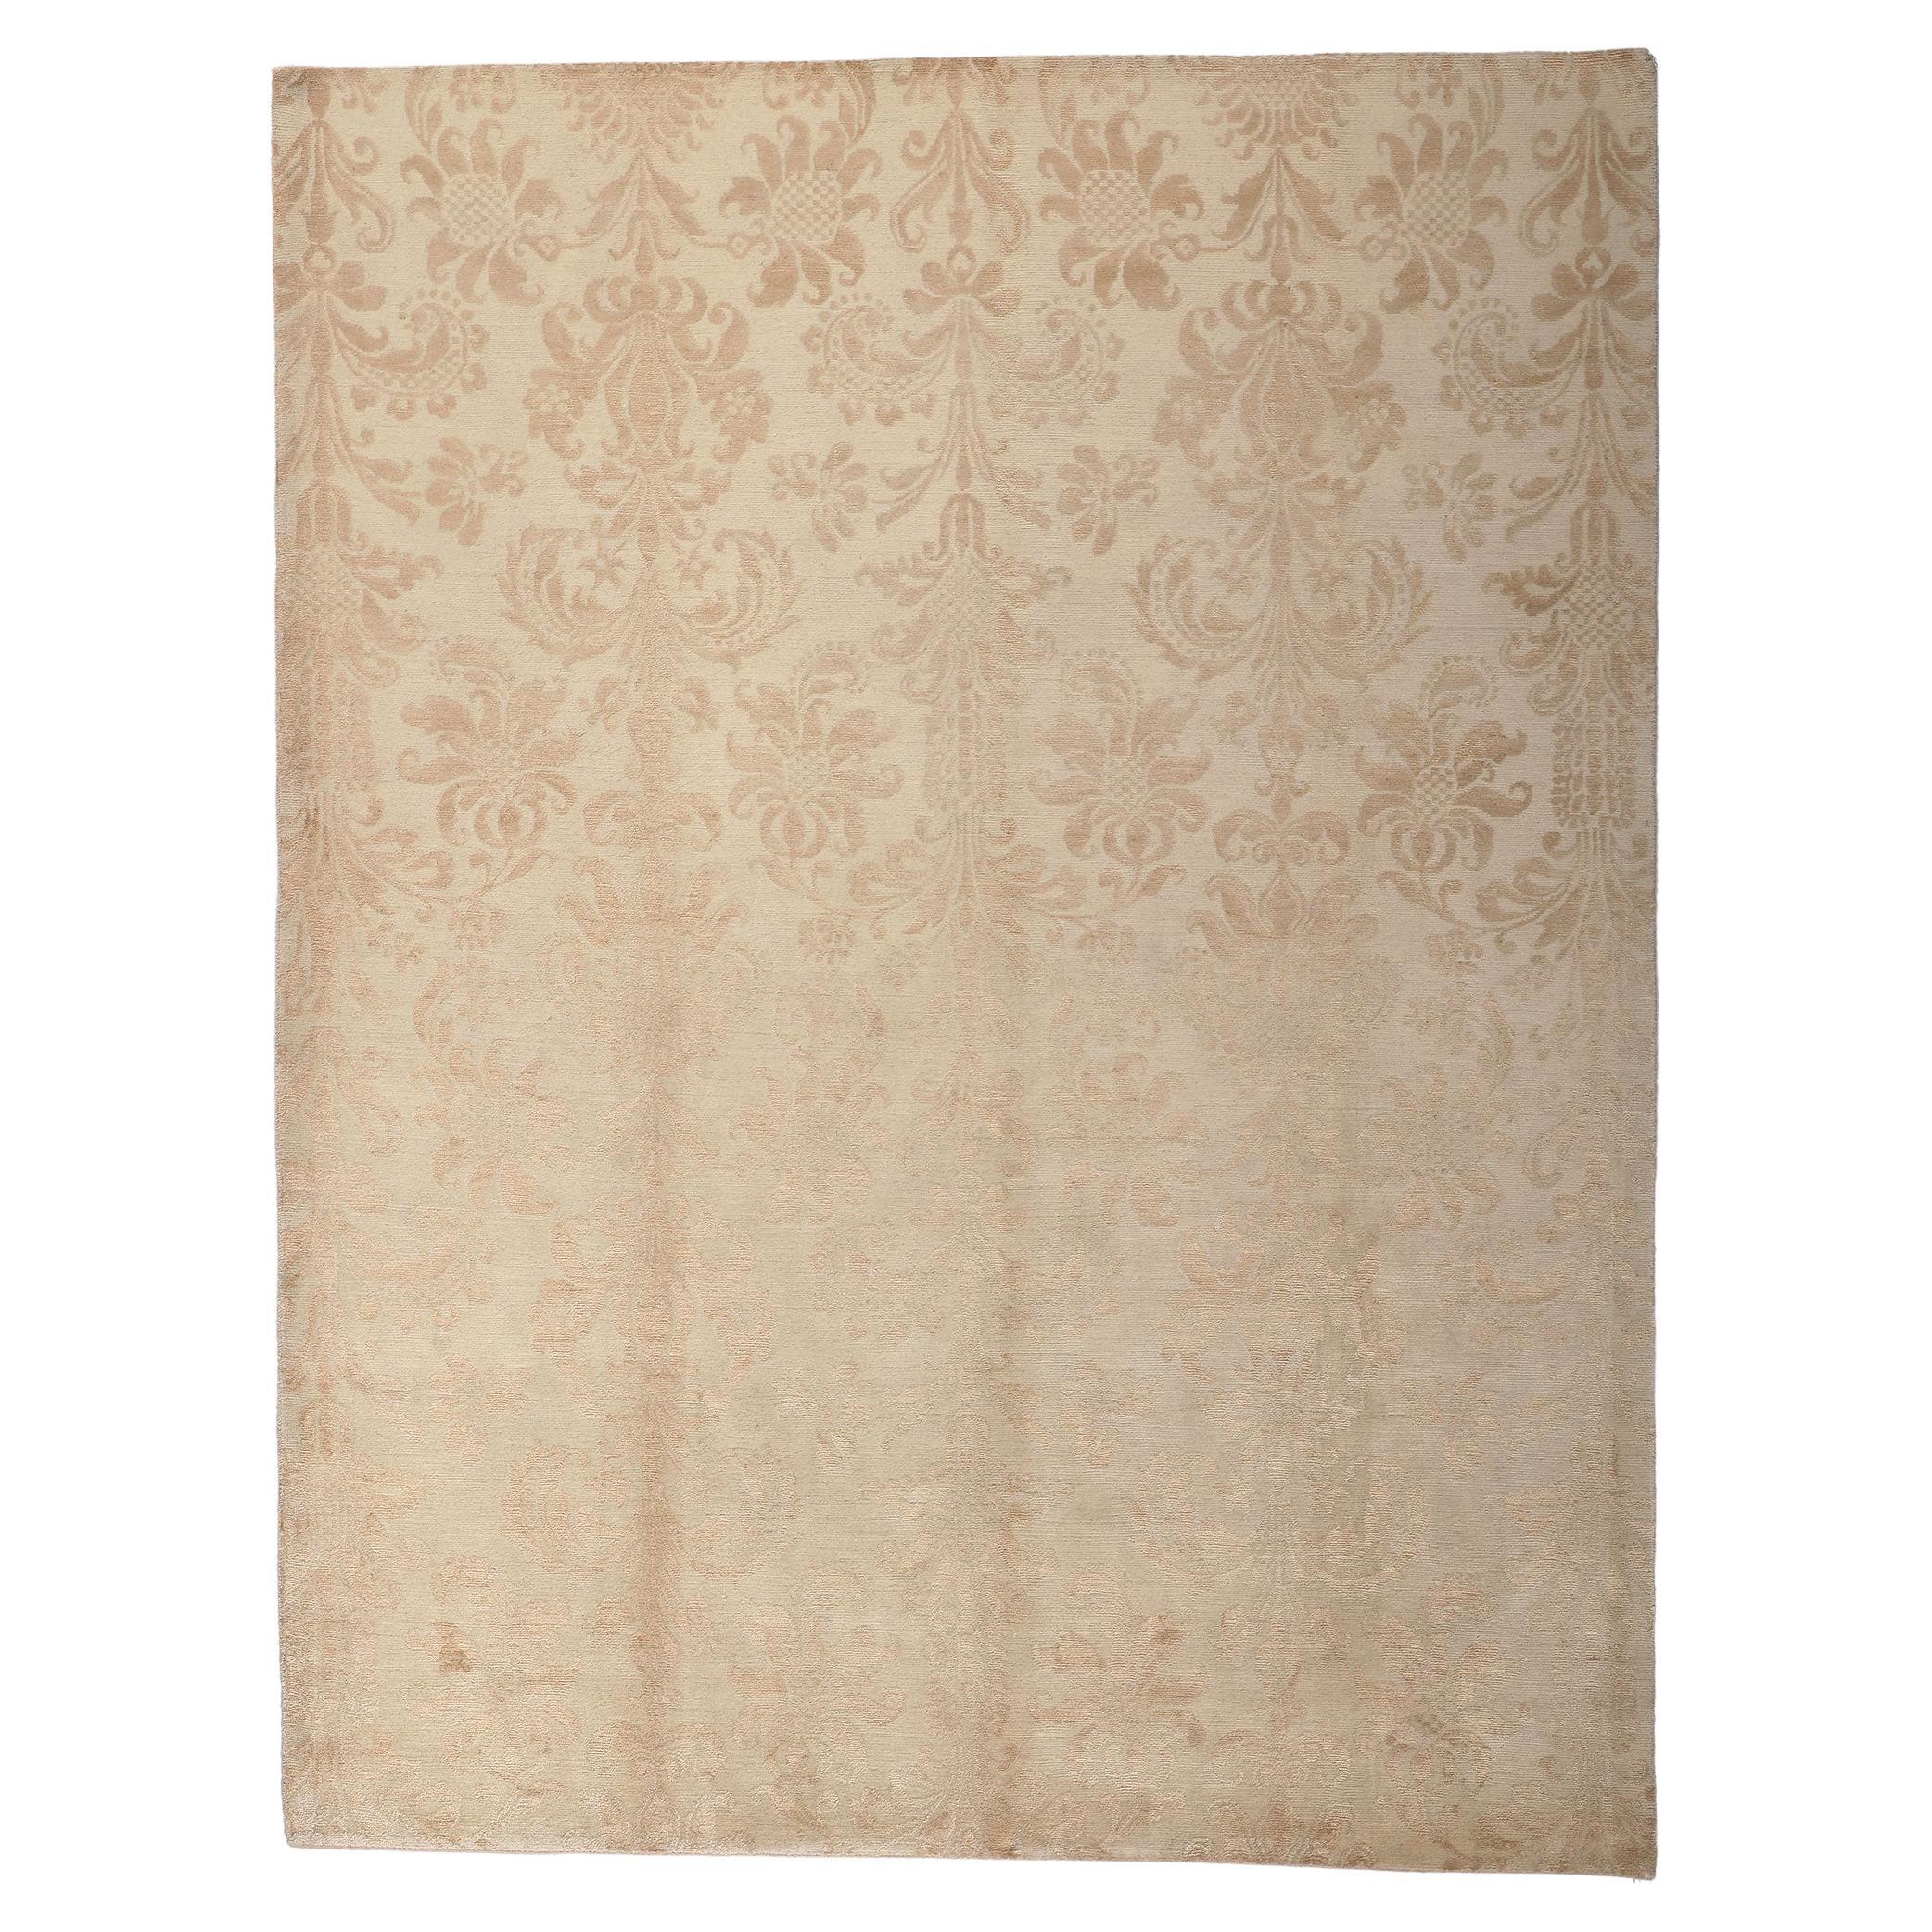 Transitional Damask Rug, Stately Decadence Meets Welcomed Informality